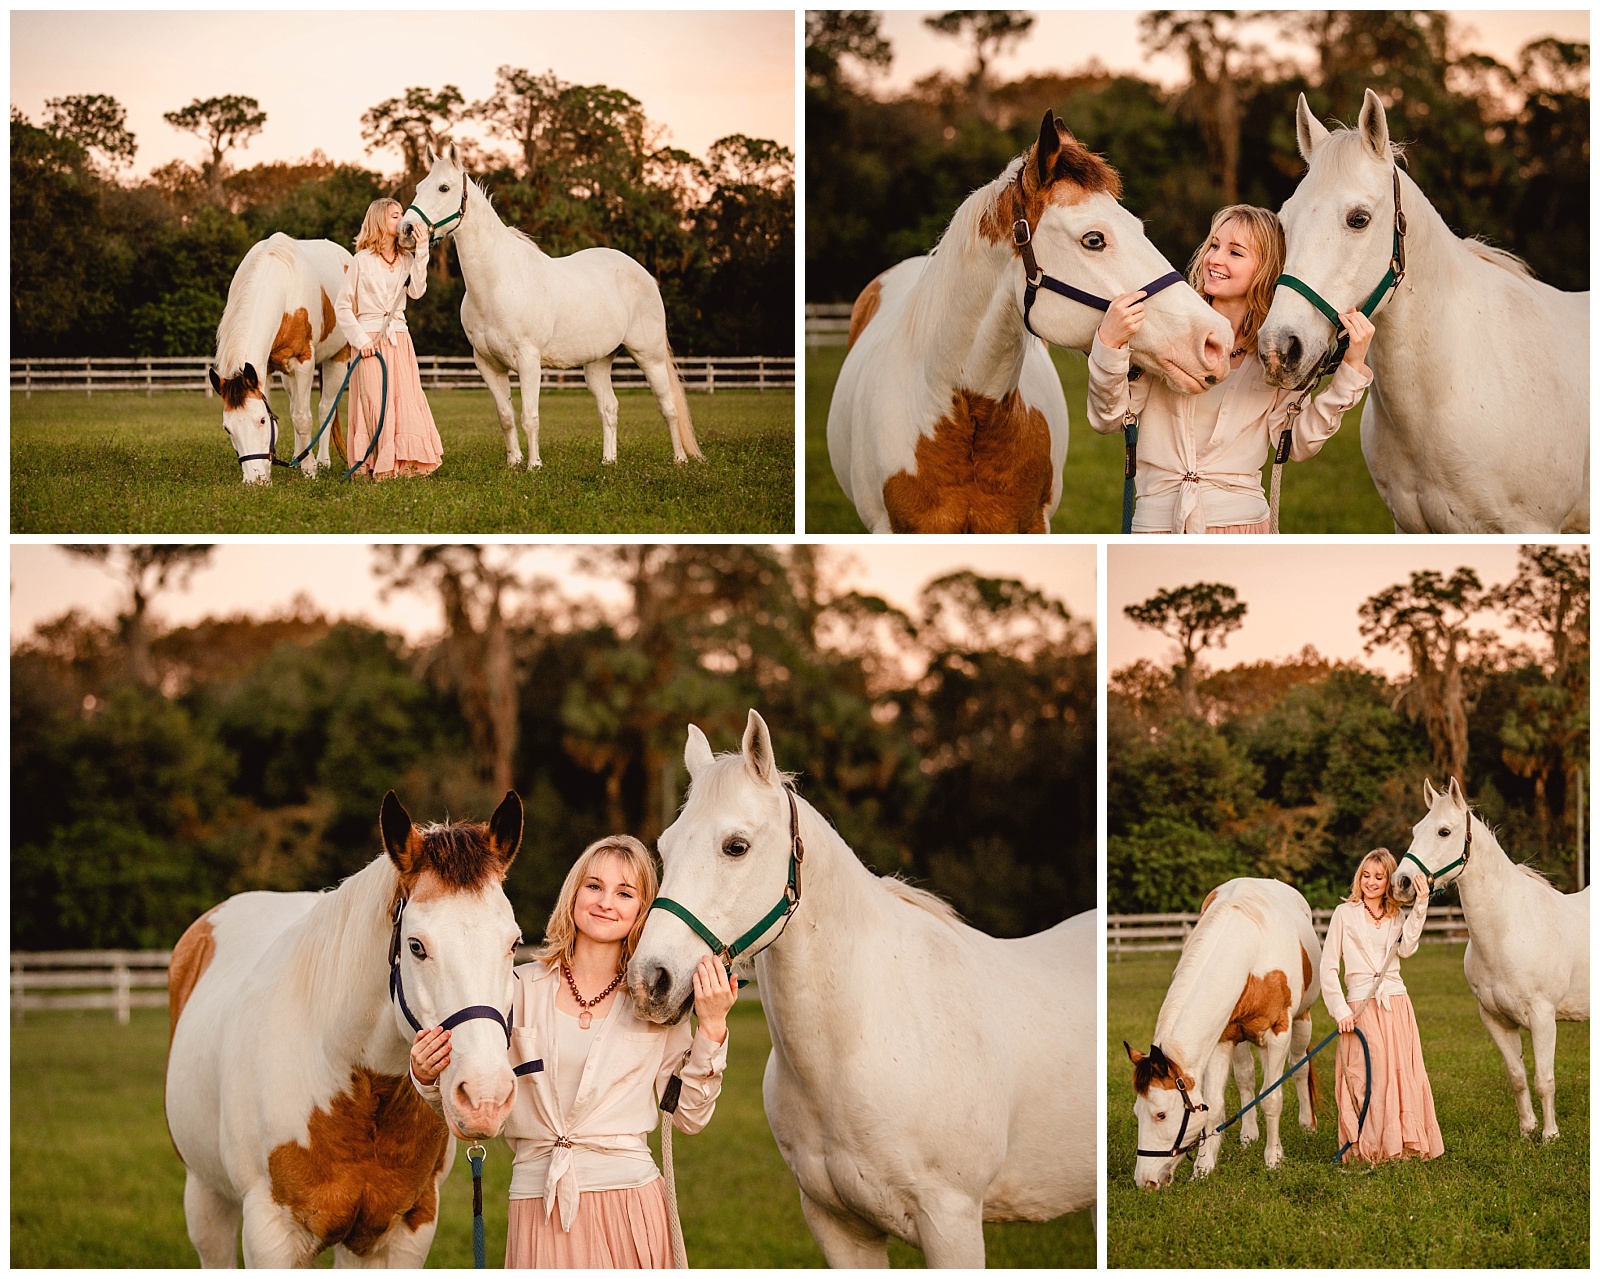 Cute photos of girl and her two horses during sunset in Fort Myers. South Florida equestrian photoshoot.